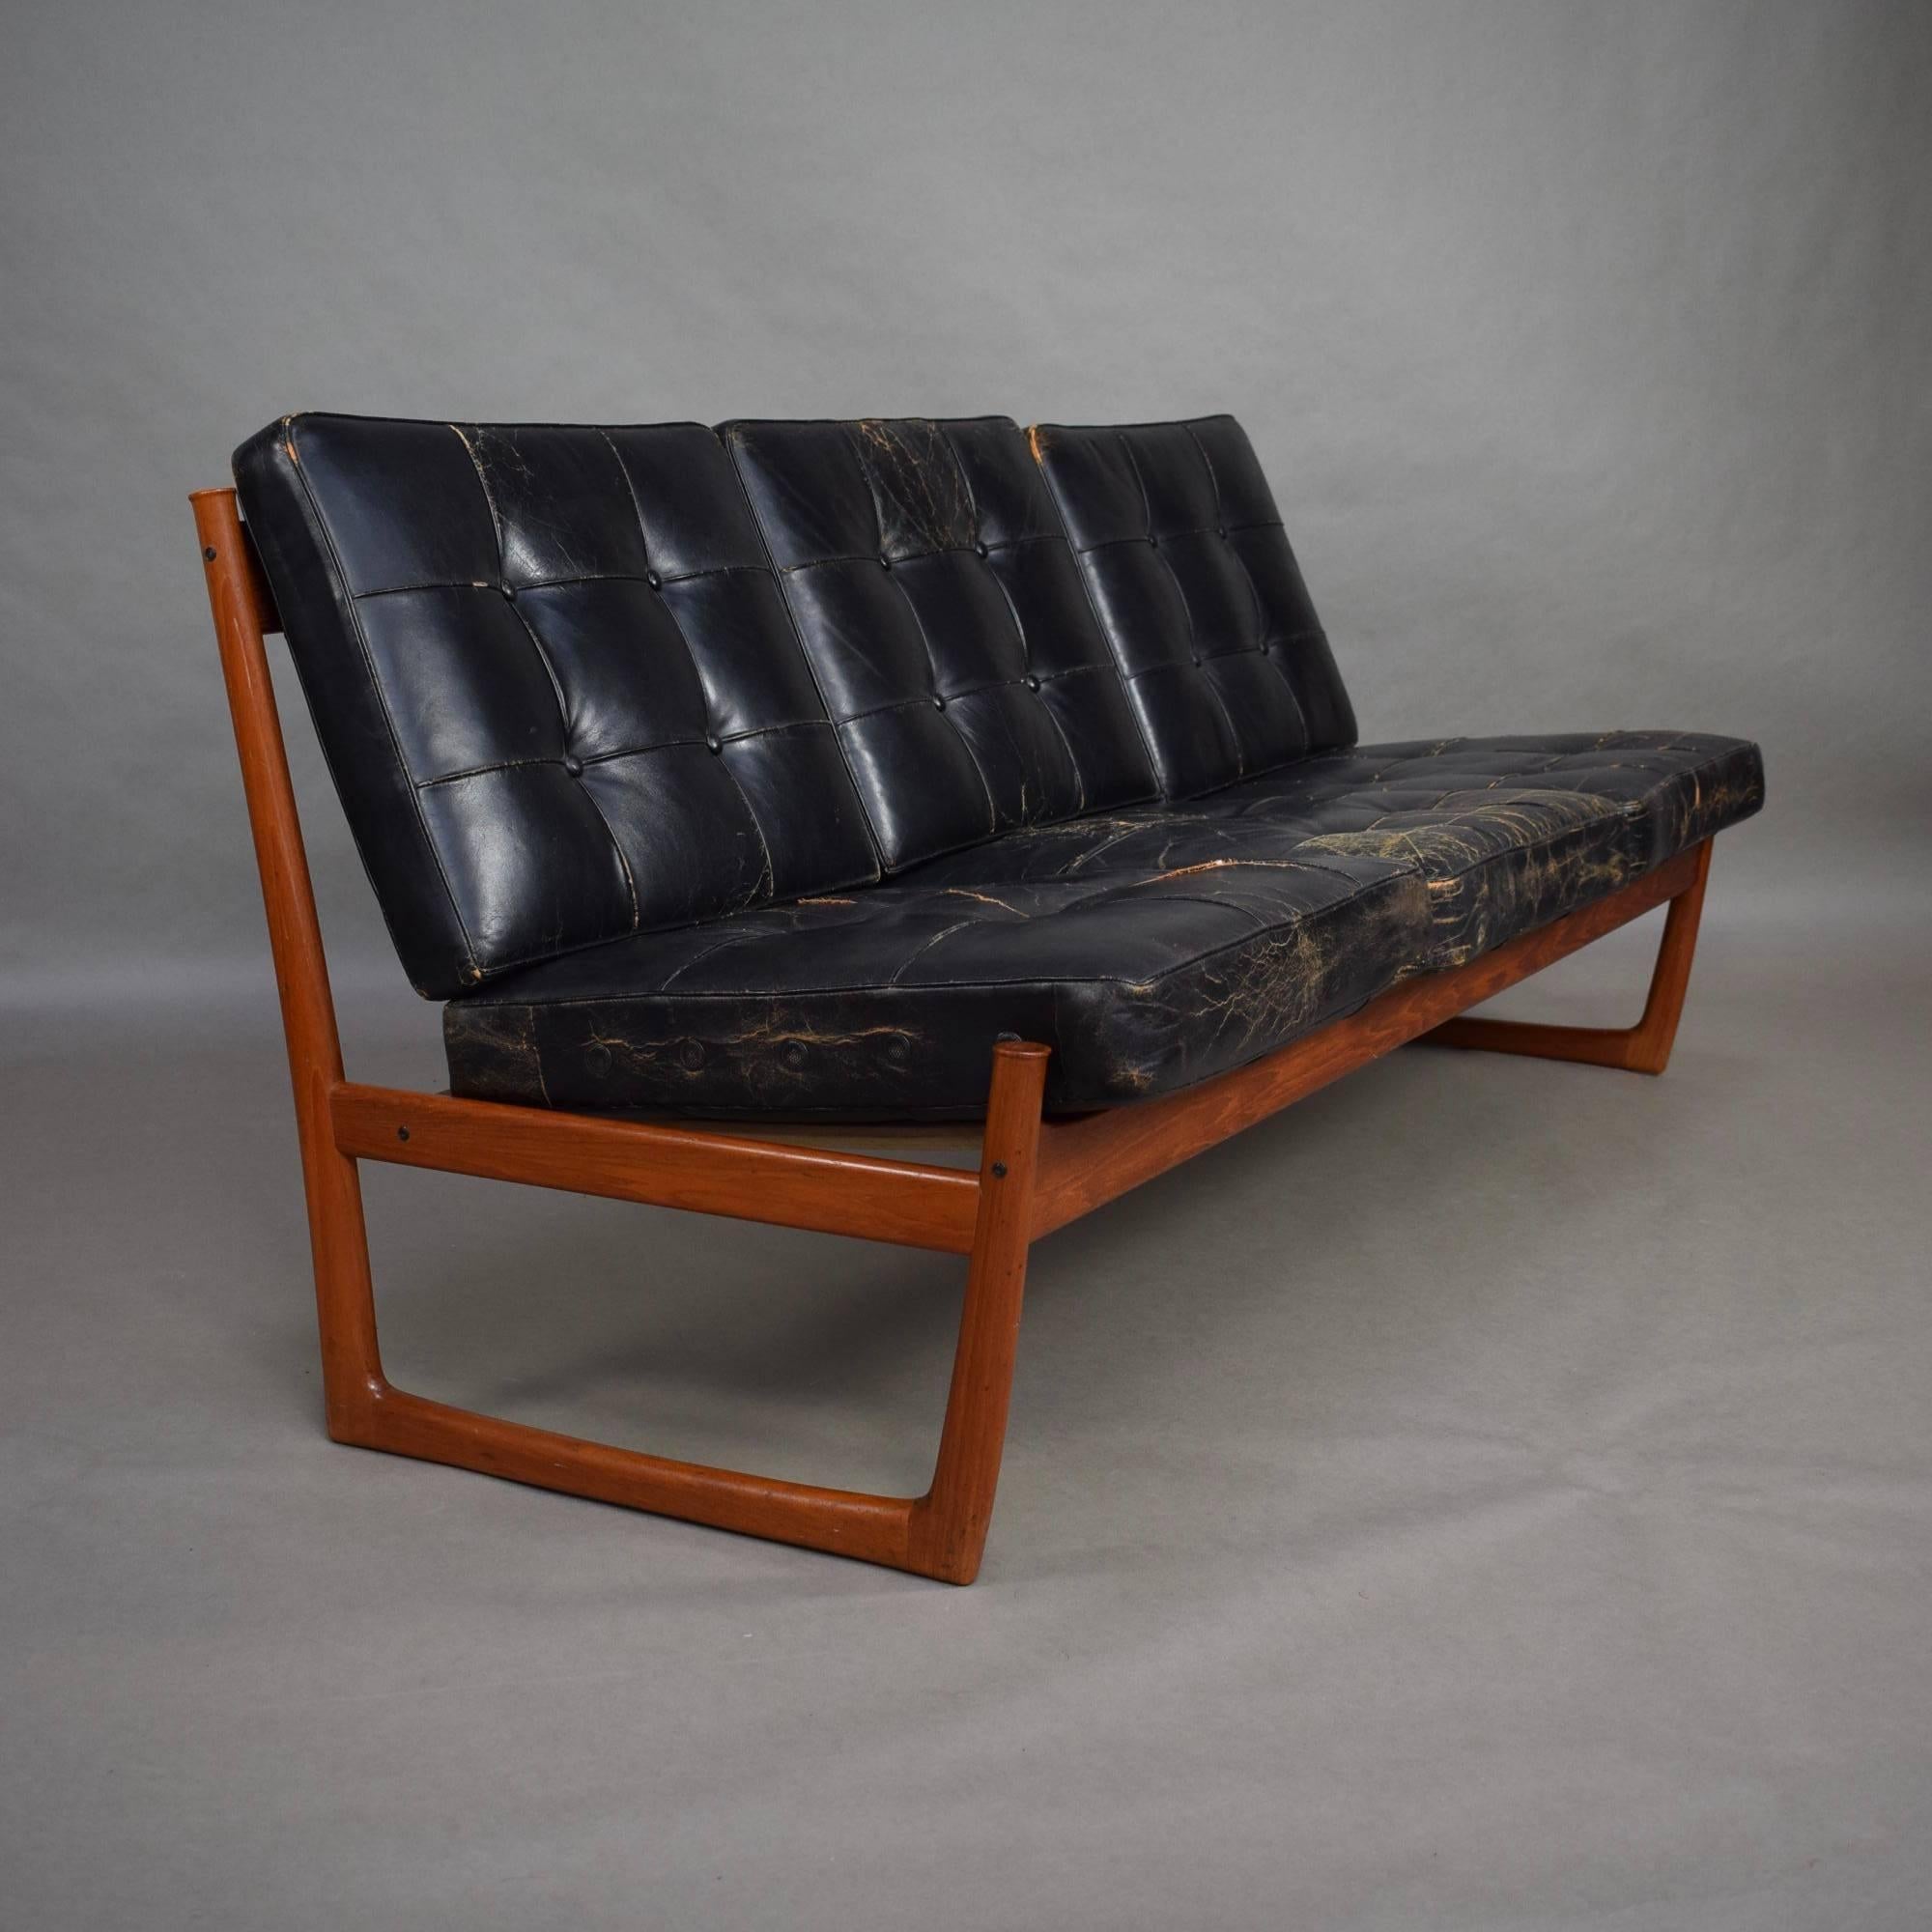 Mid-20th Century Teak and Leather Sofa Model FD130 by Hvidt and Molgaard-Nielsen, circa 1950